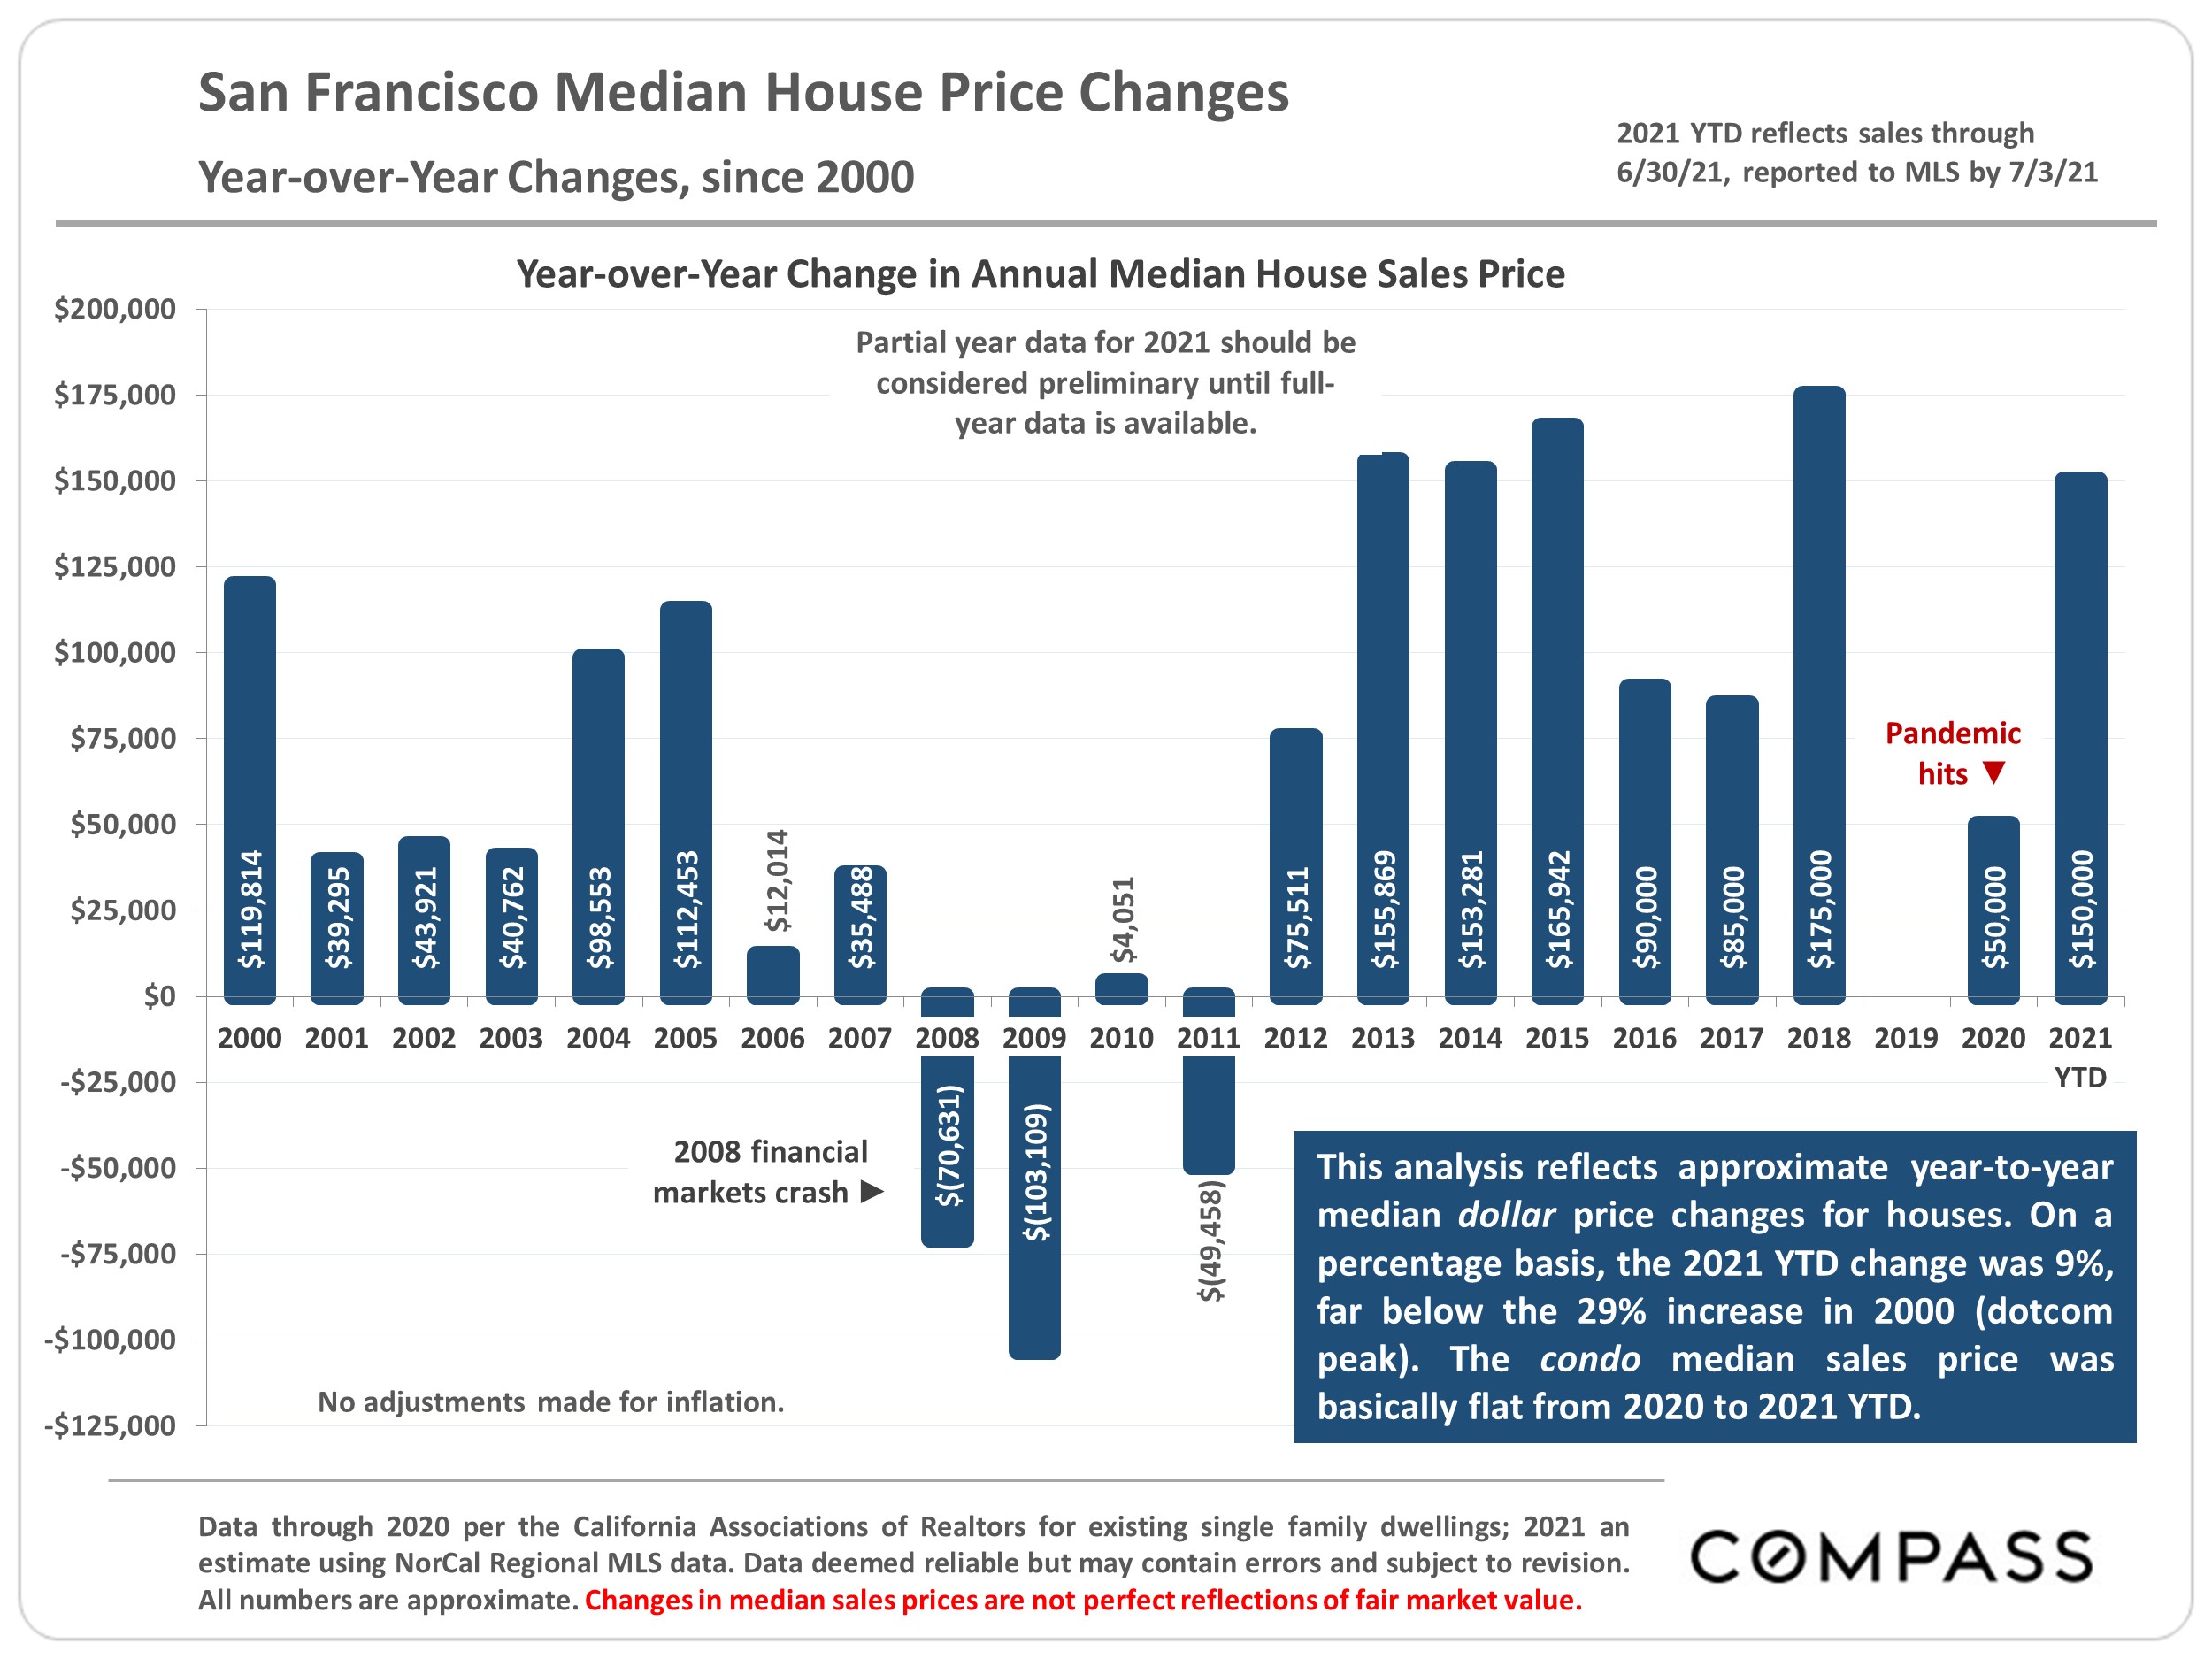 annual median house sales price